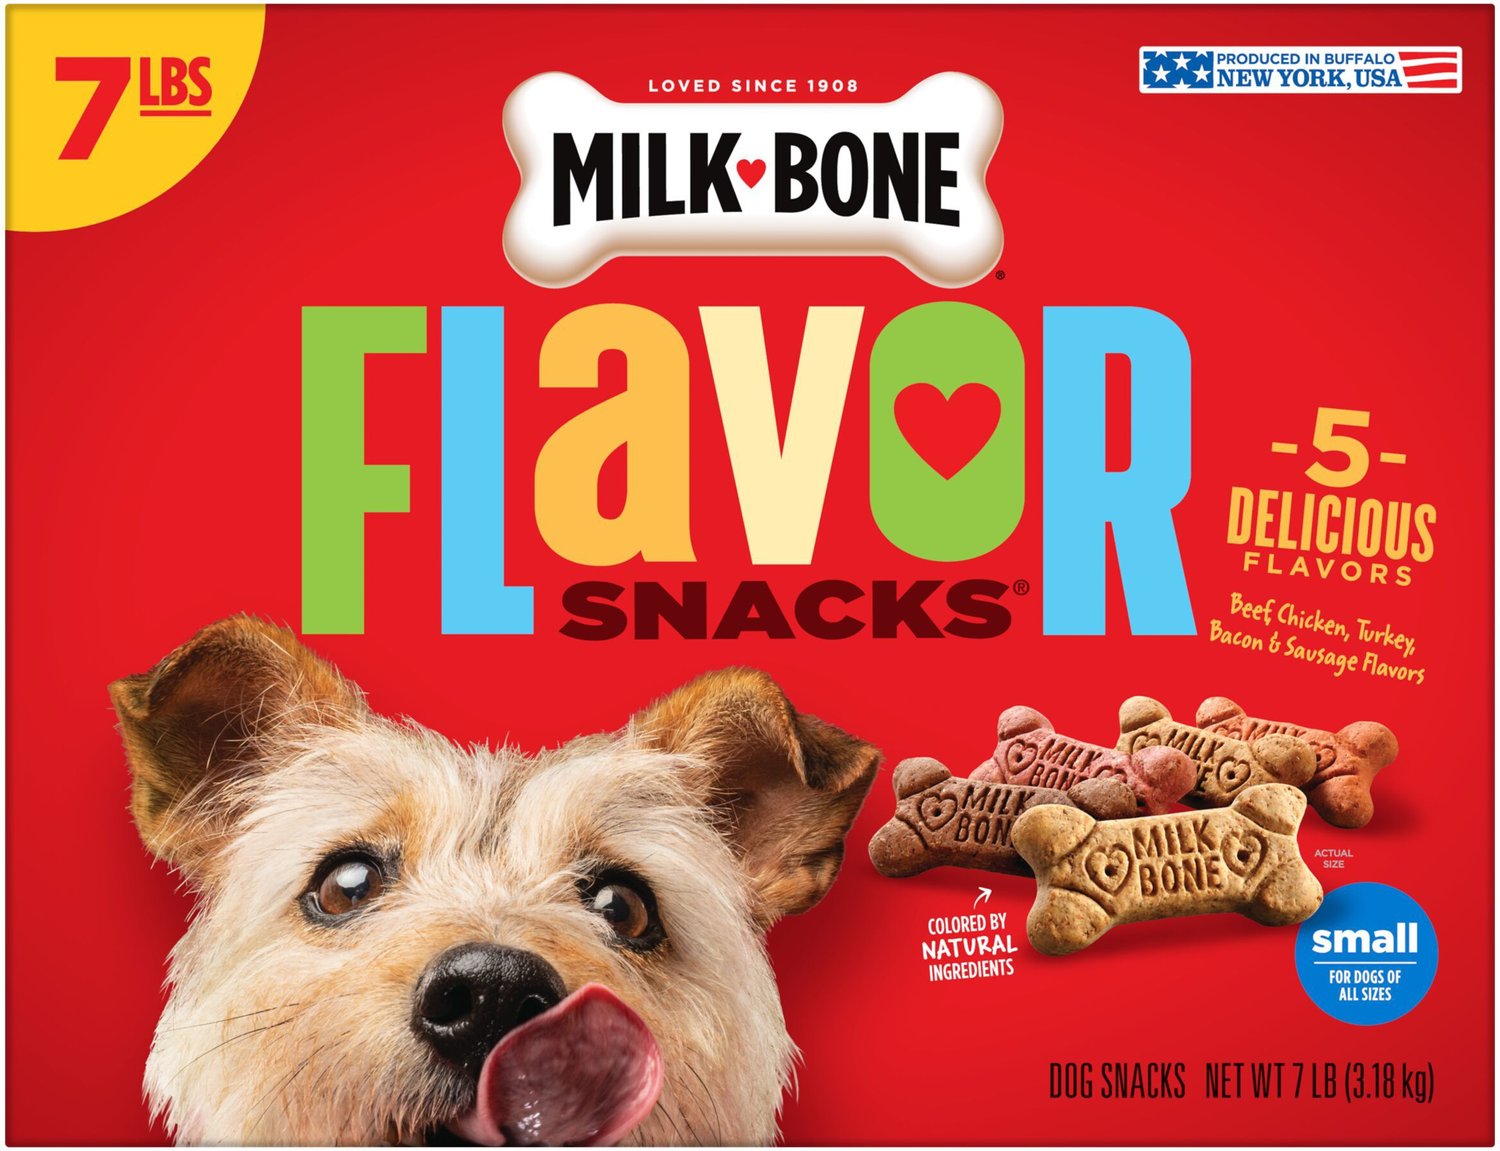 dog bones for small dogs